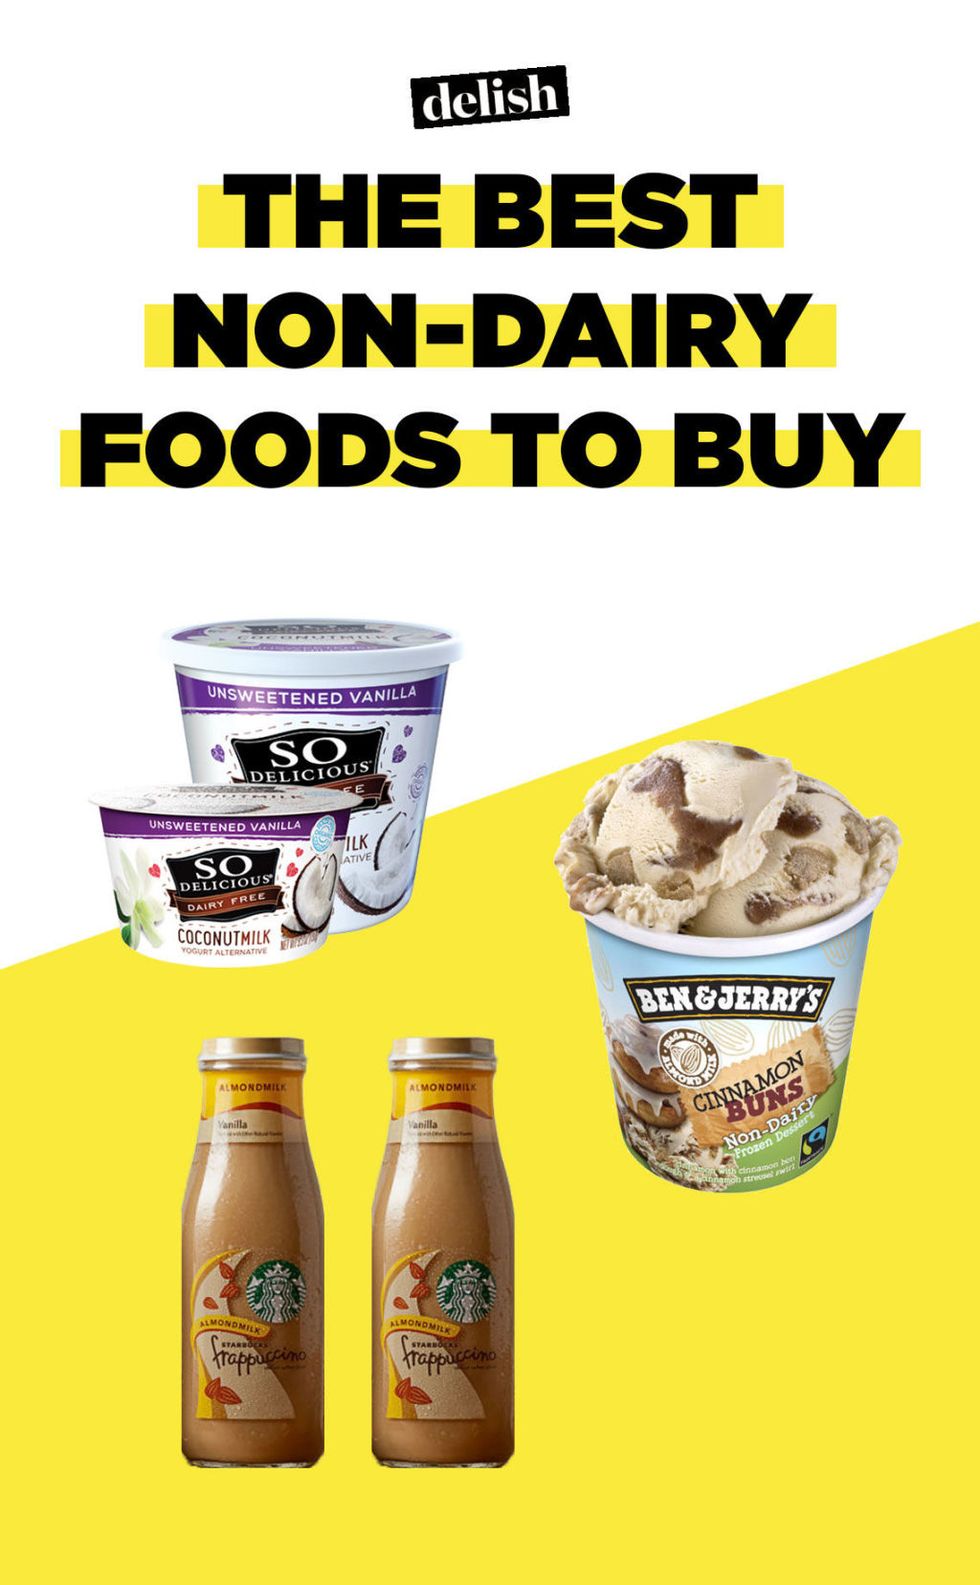 Affordable dairy-free products